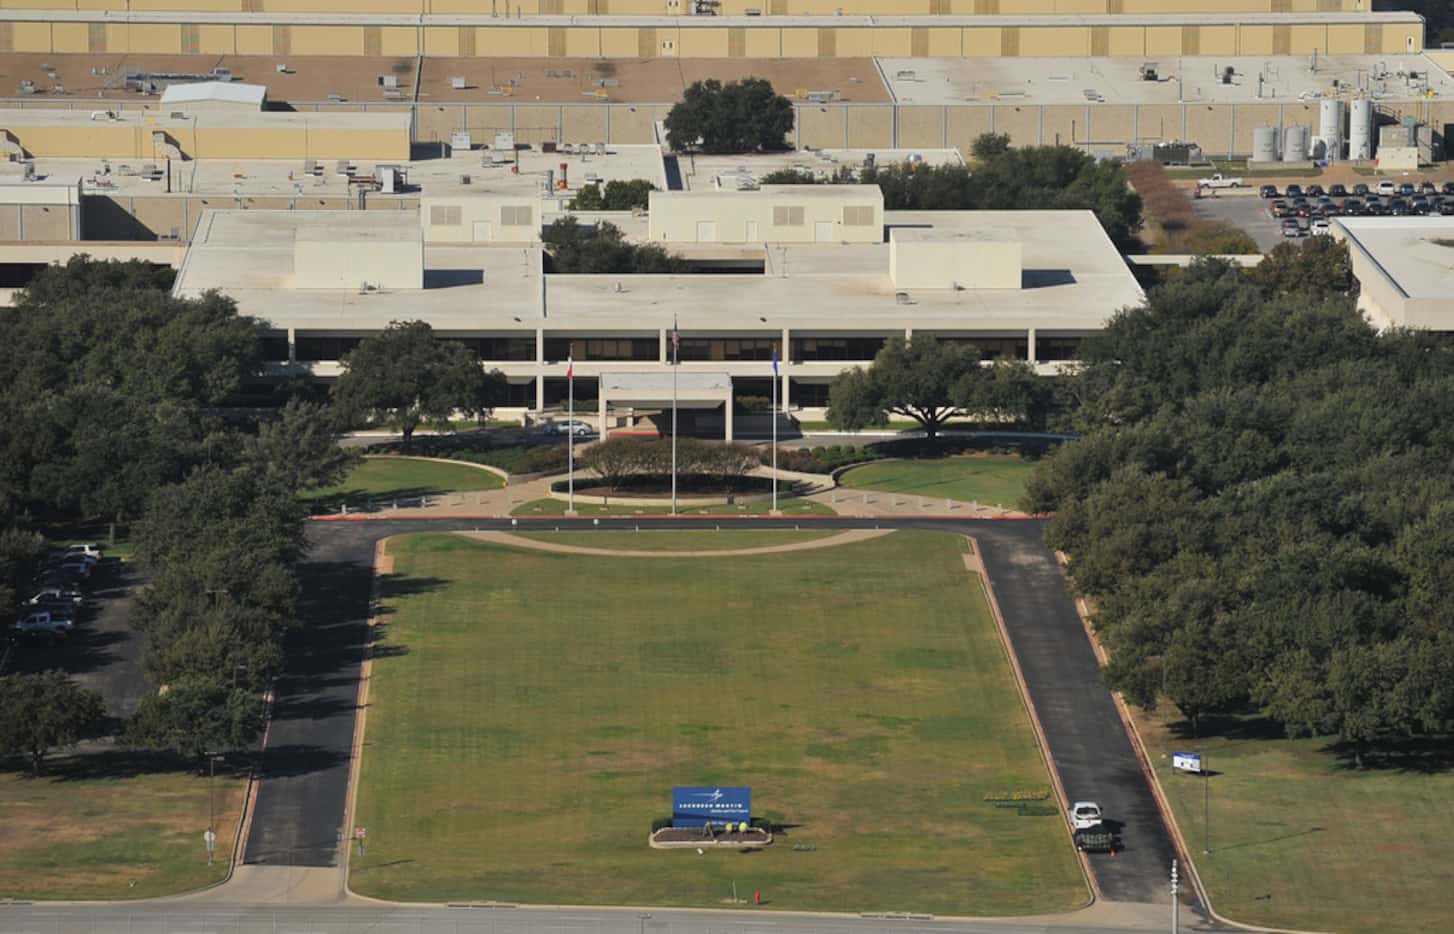 Exterior of Lockheed Martin's Missiles and Fire Control facility in Grand Prairie.